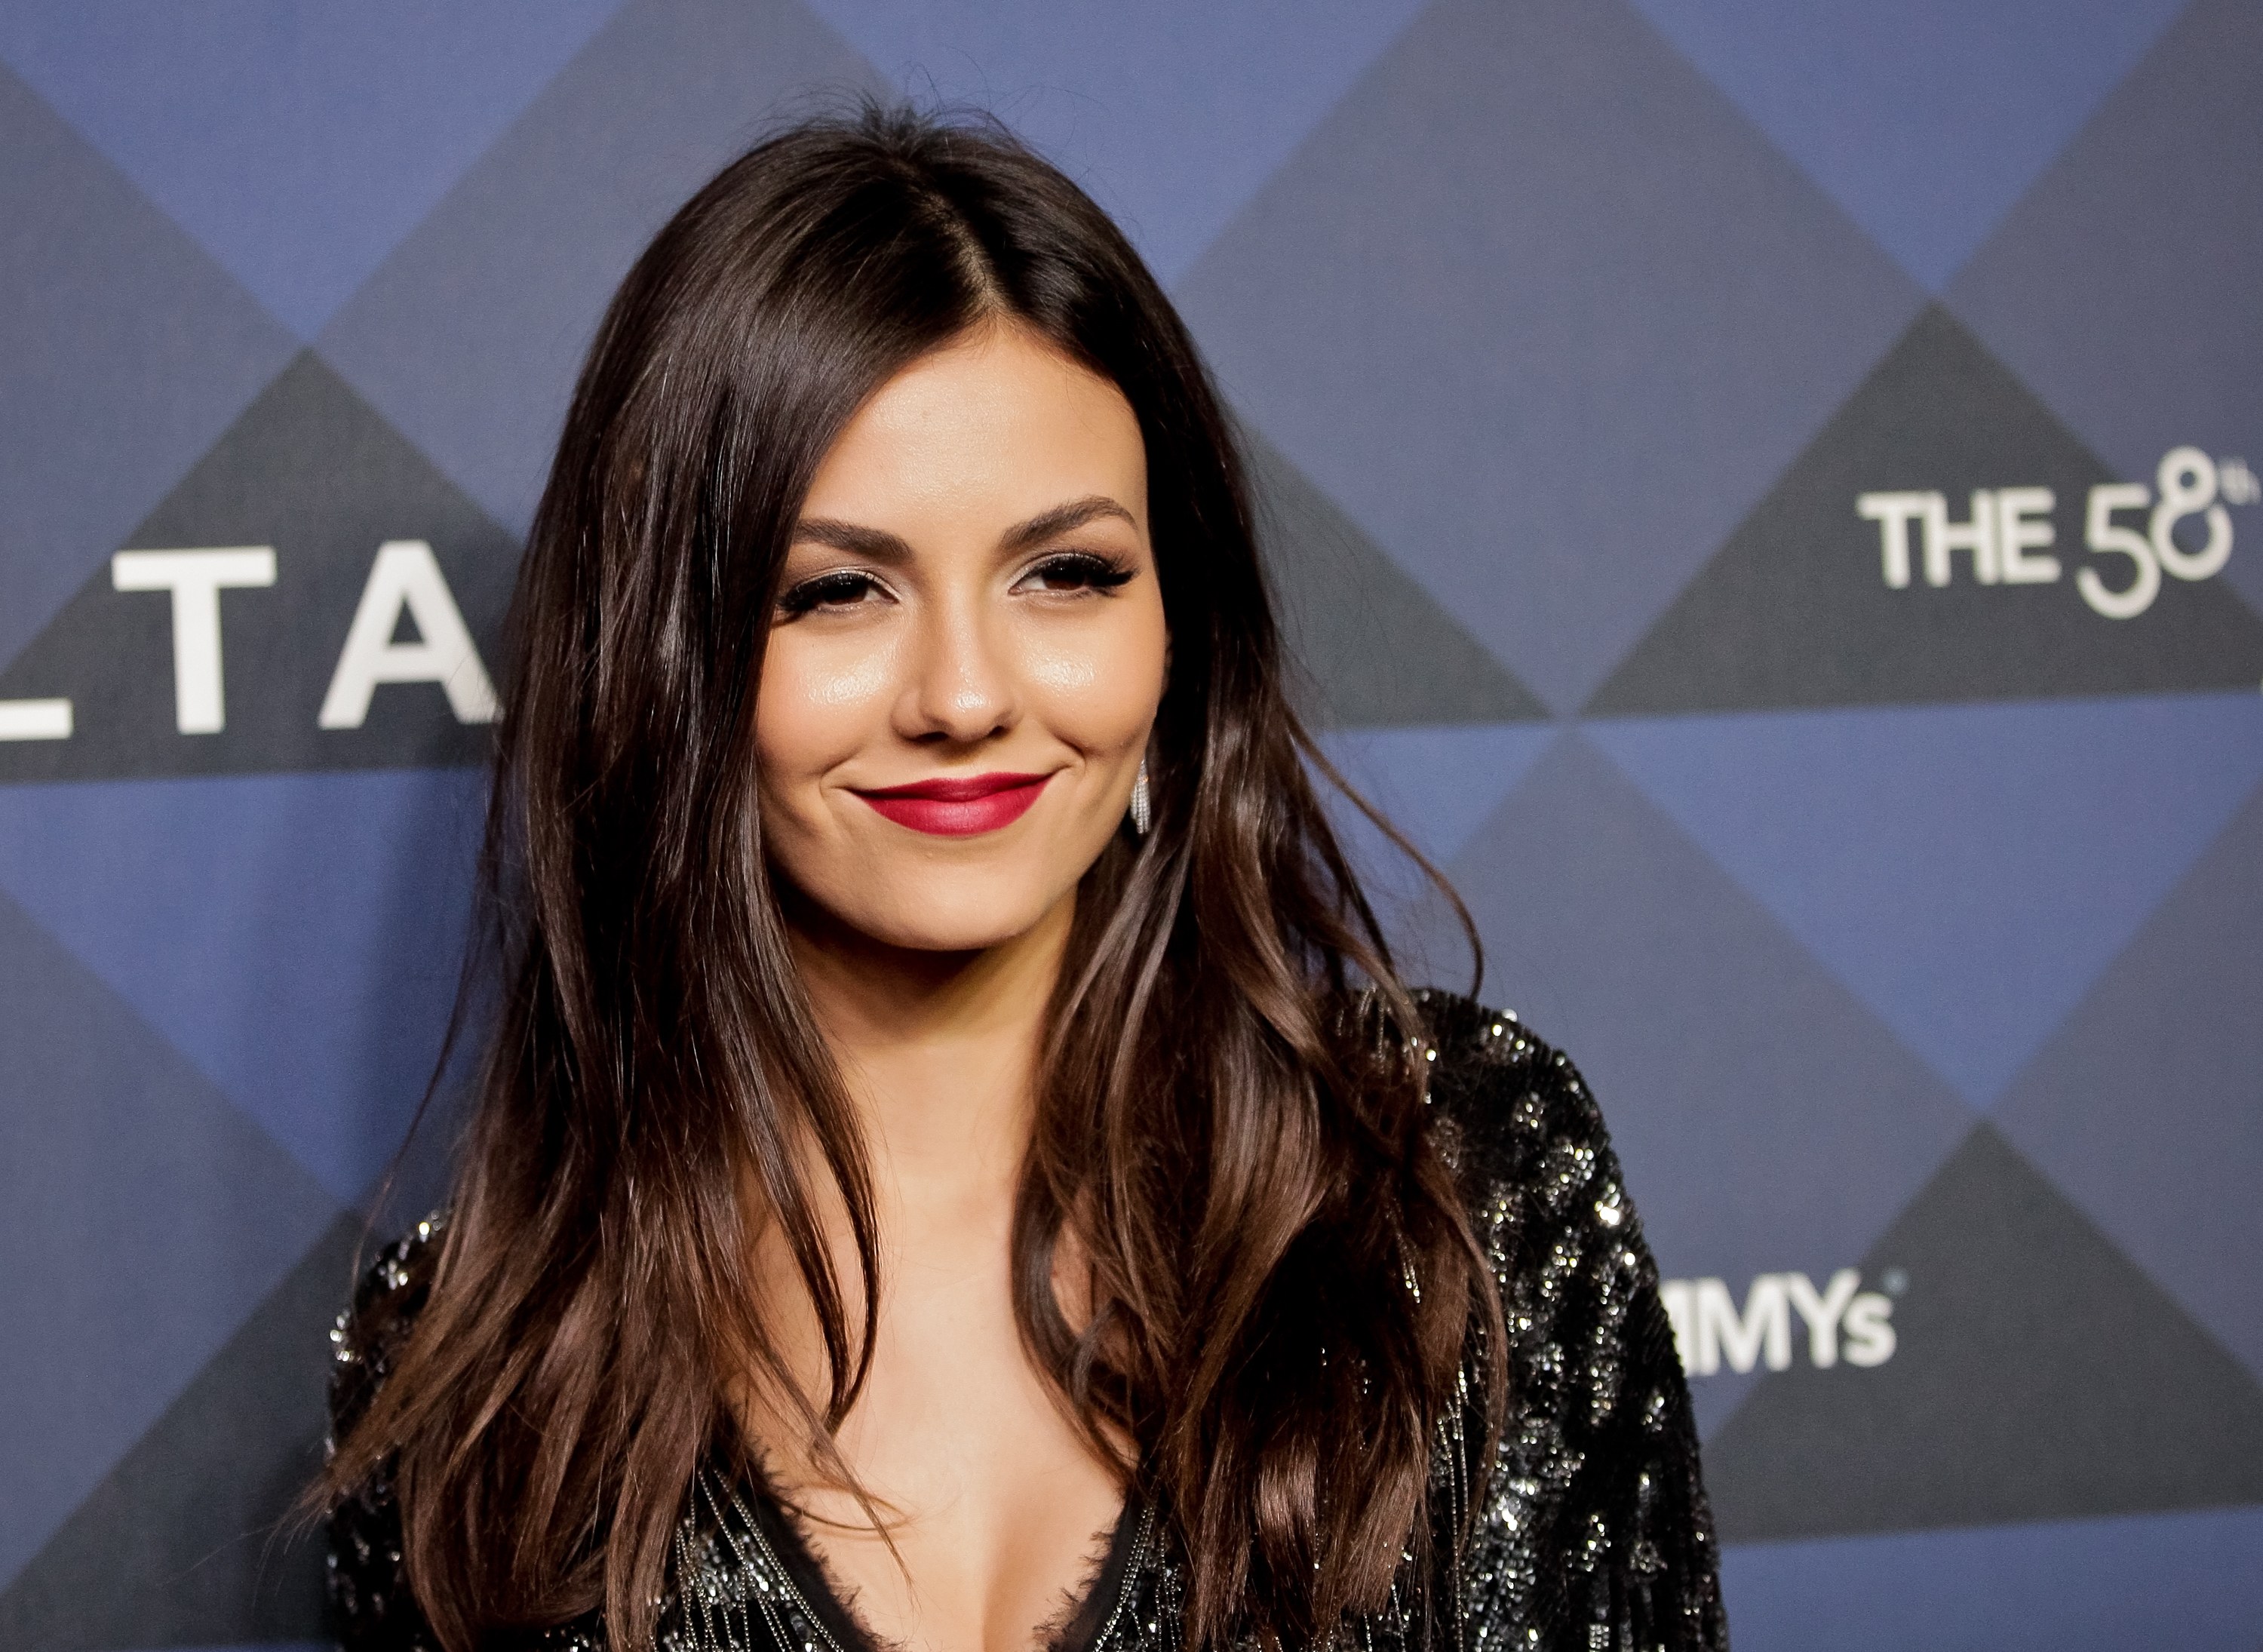 Victoria Justice Cute Wallpaper Hd Celebrities Wallpapers 4k Wallpapers Images Backgrounds